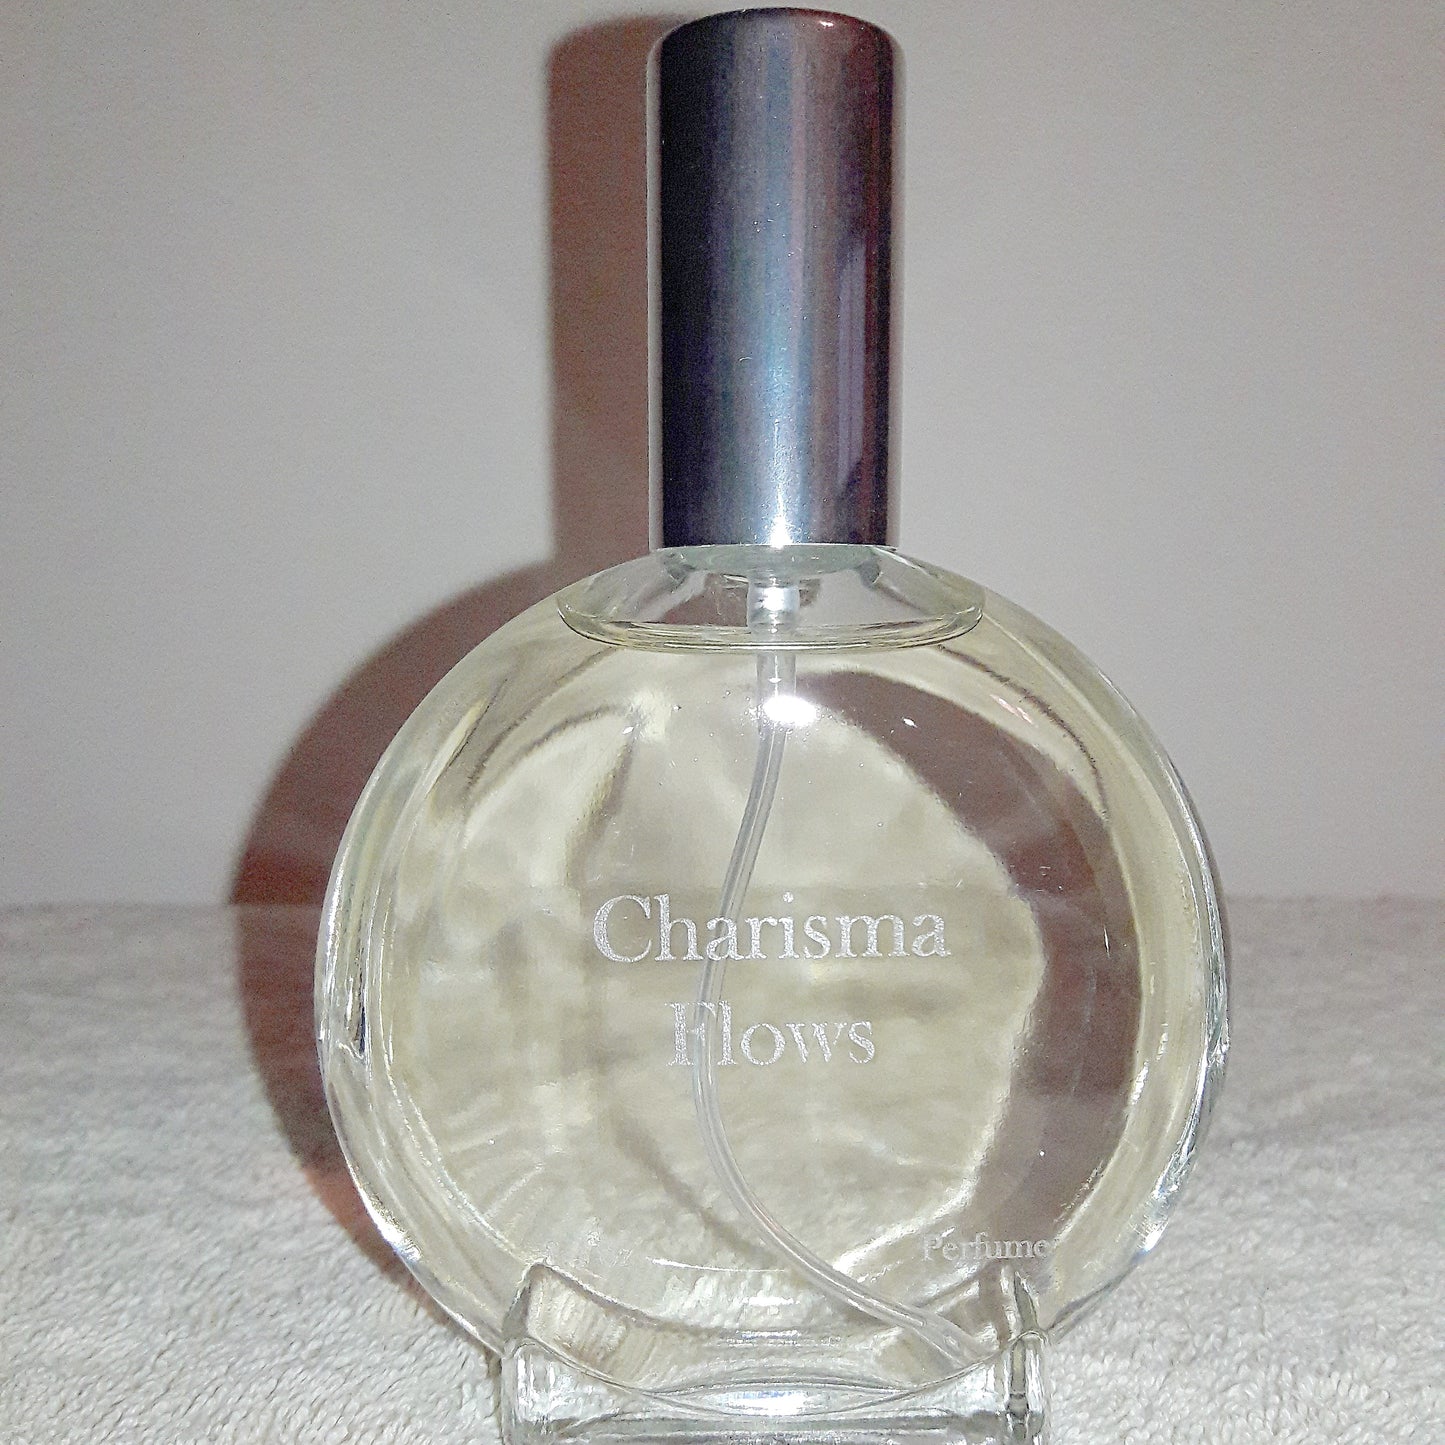 Charisma Flows Limited Edition